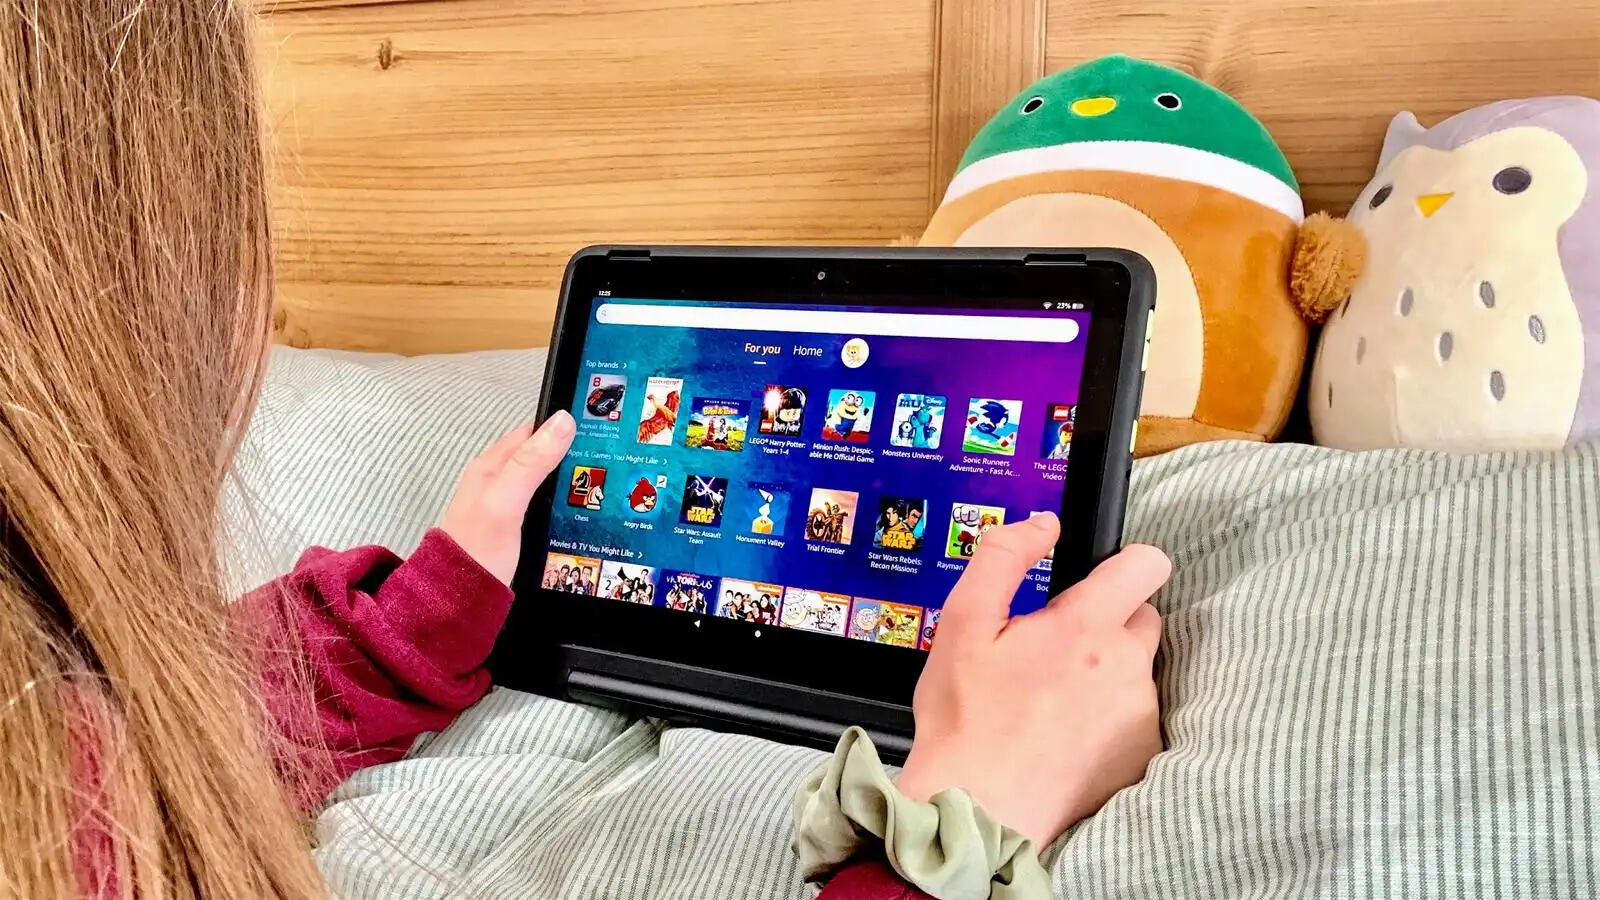 How To Update Roblox On Amazon Kid Tablet